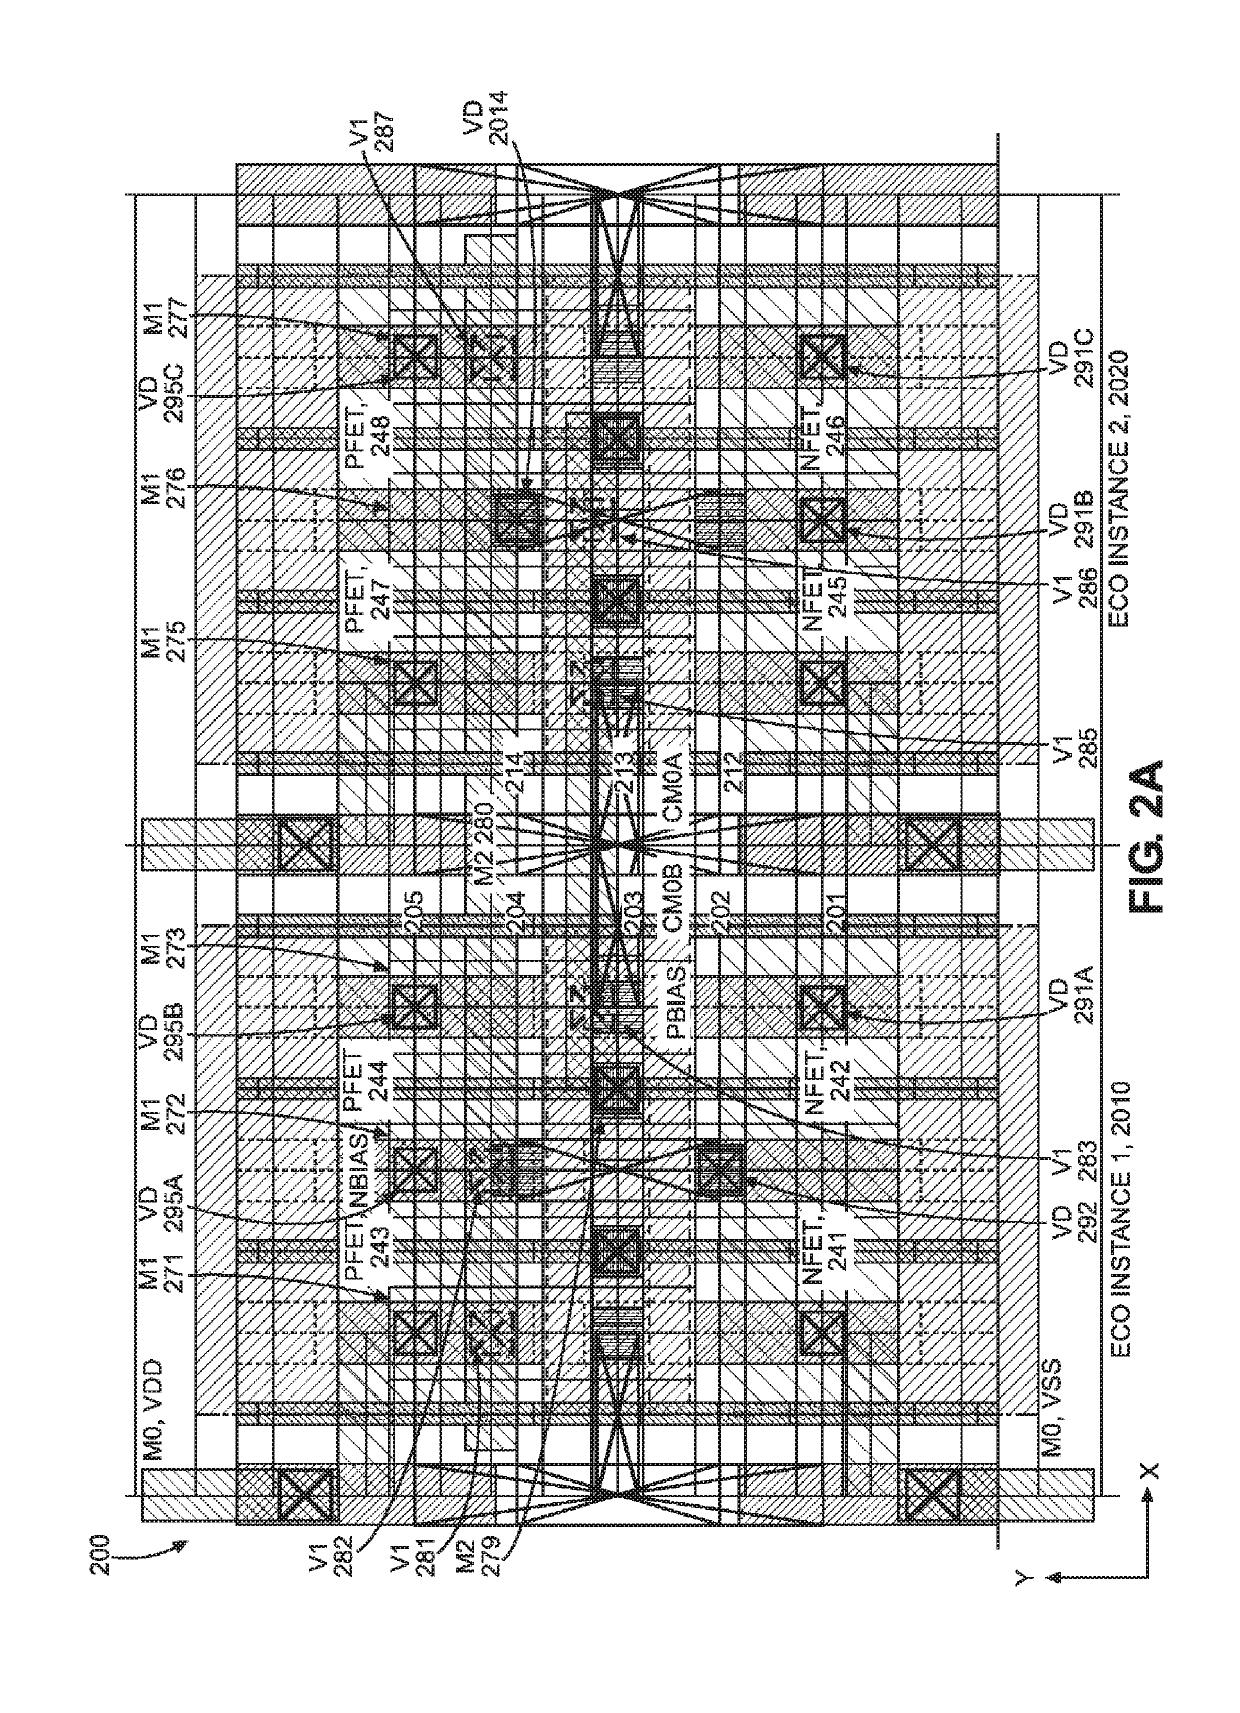 Integrated circuit (IC) design methods using engineering change order (ECO) cell architectures